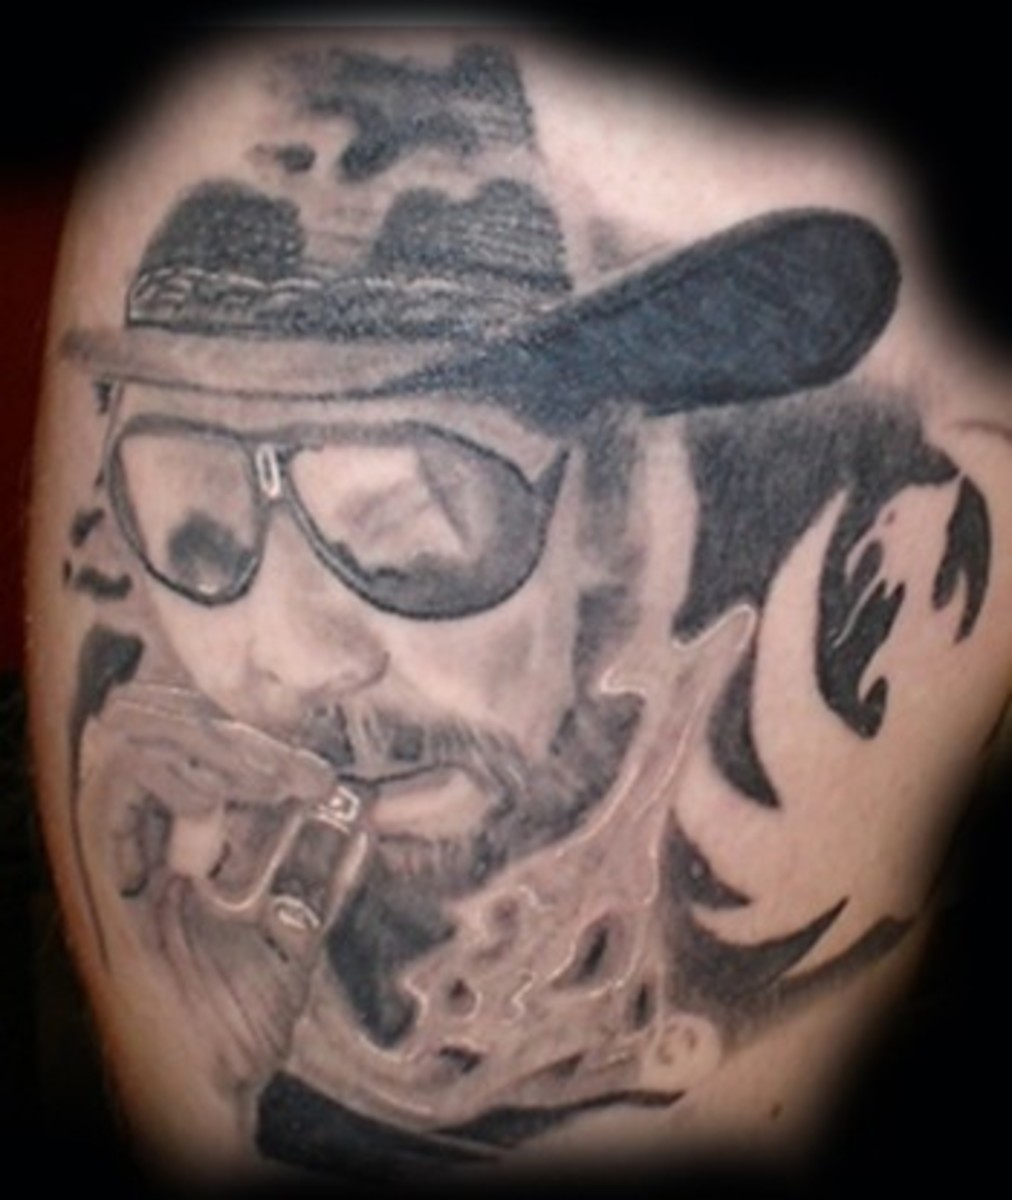 What are country-western tattoos?